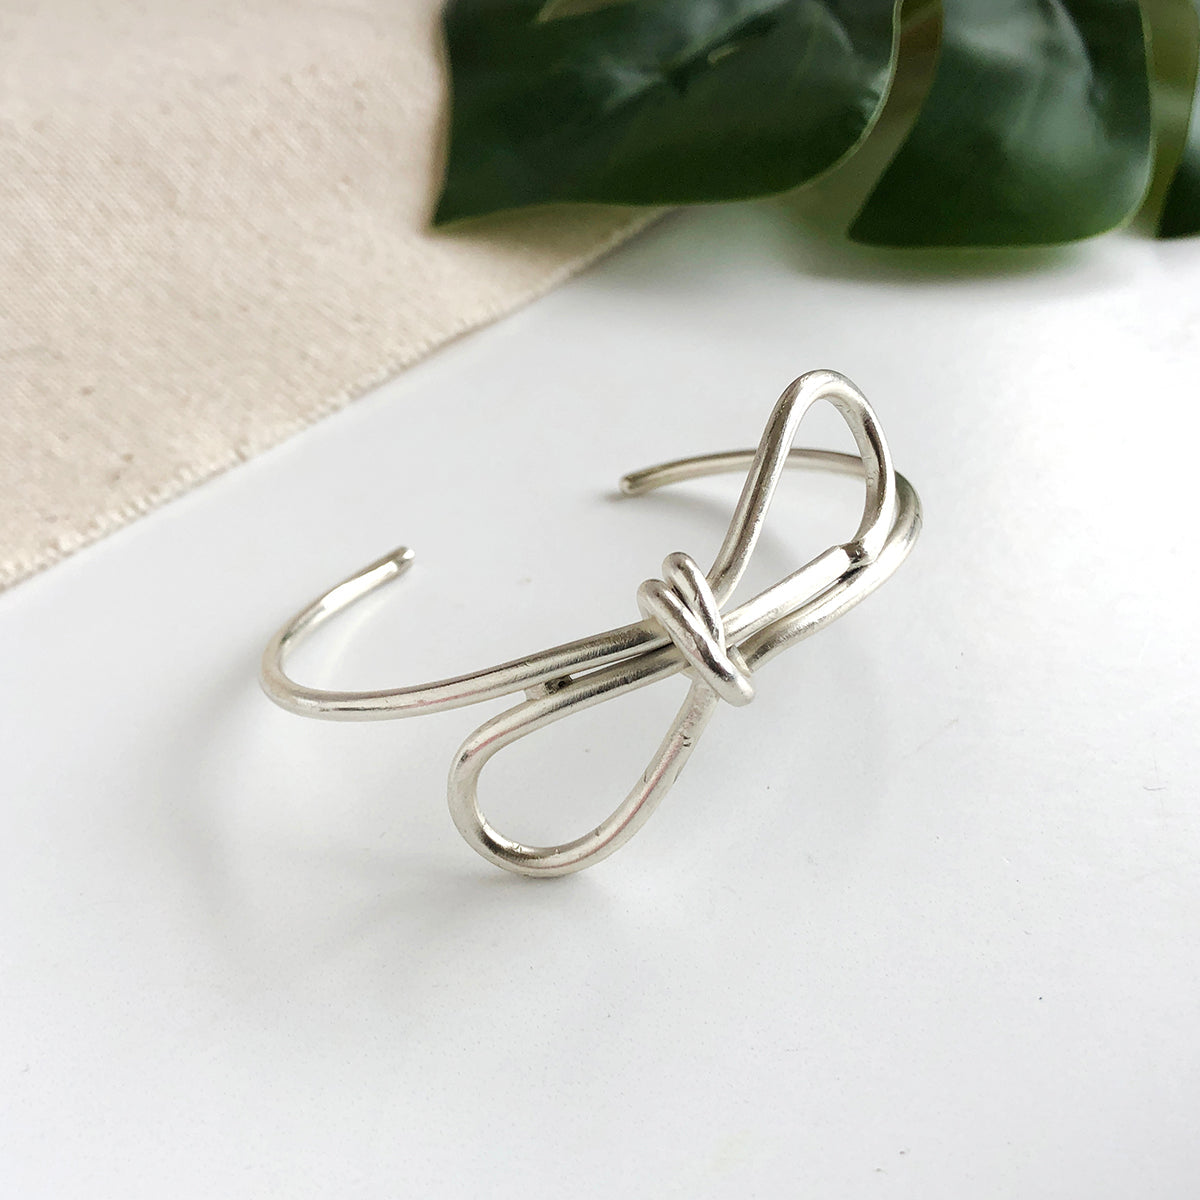 Product photo for the silver “Sculptural Bow” Cuff.